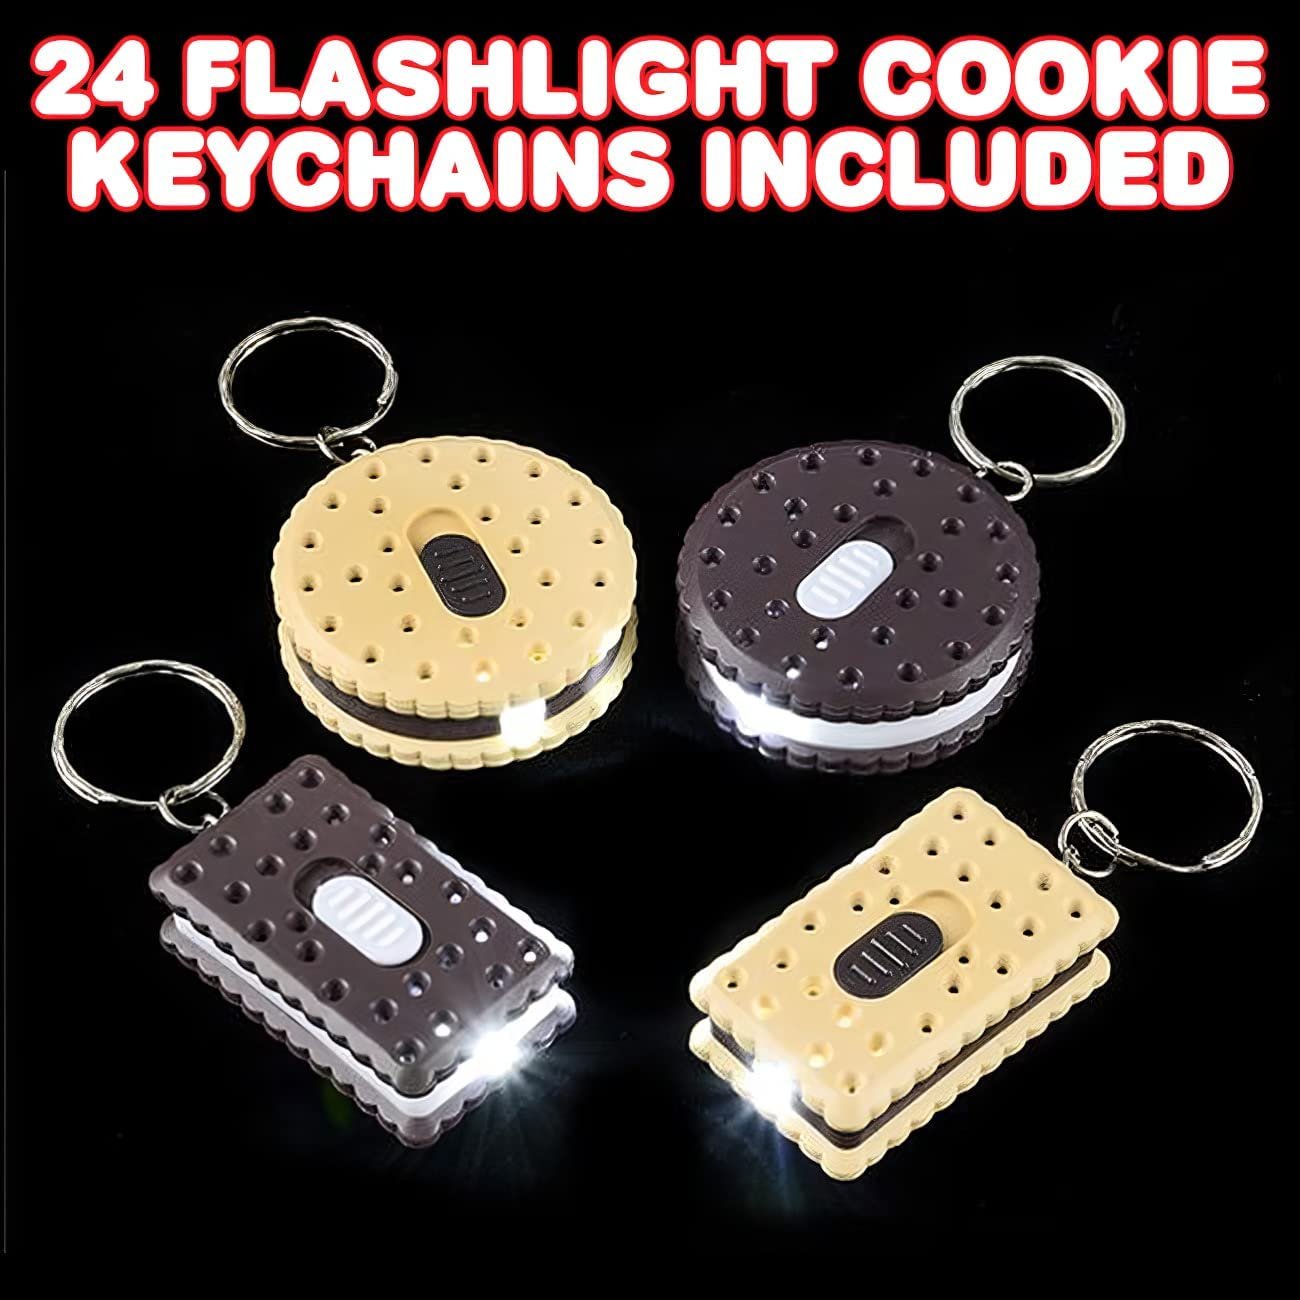 ArtCreativity Sandwich Cookie Flashlight Keychains, Pack of 24, LED Key Chains in Assorted Cookie Replicas, Durable Plastic Keyholders, Birthday Party Favors, Goodie Bag Fillers for Kids